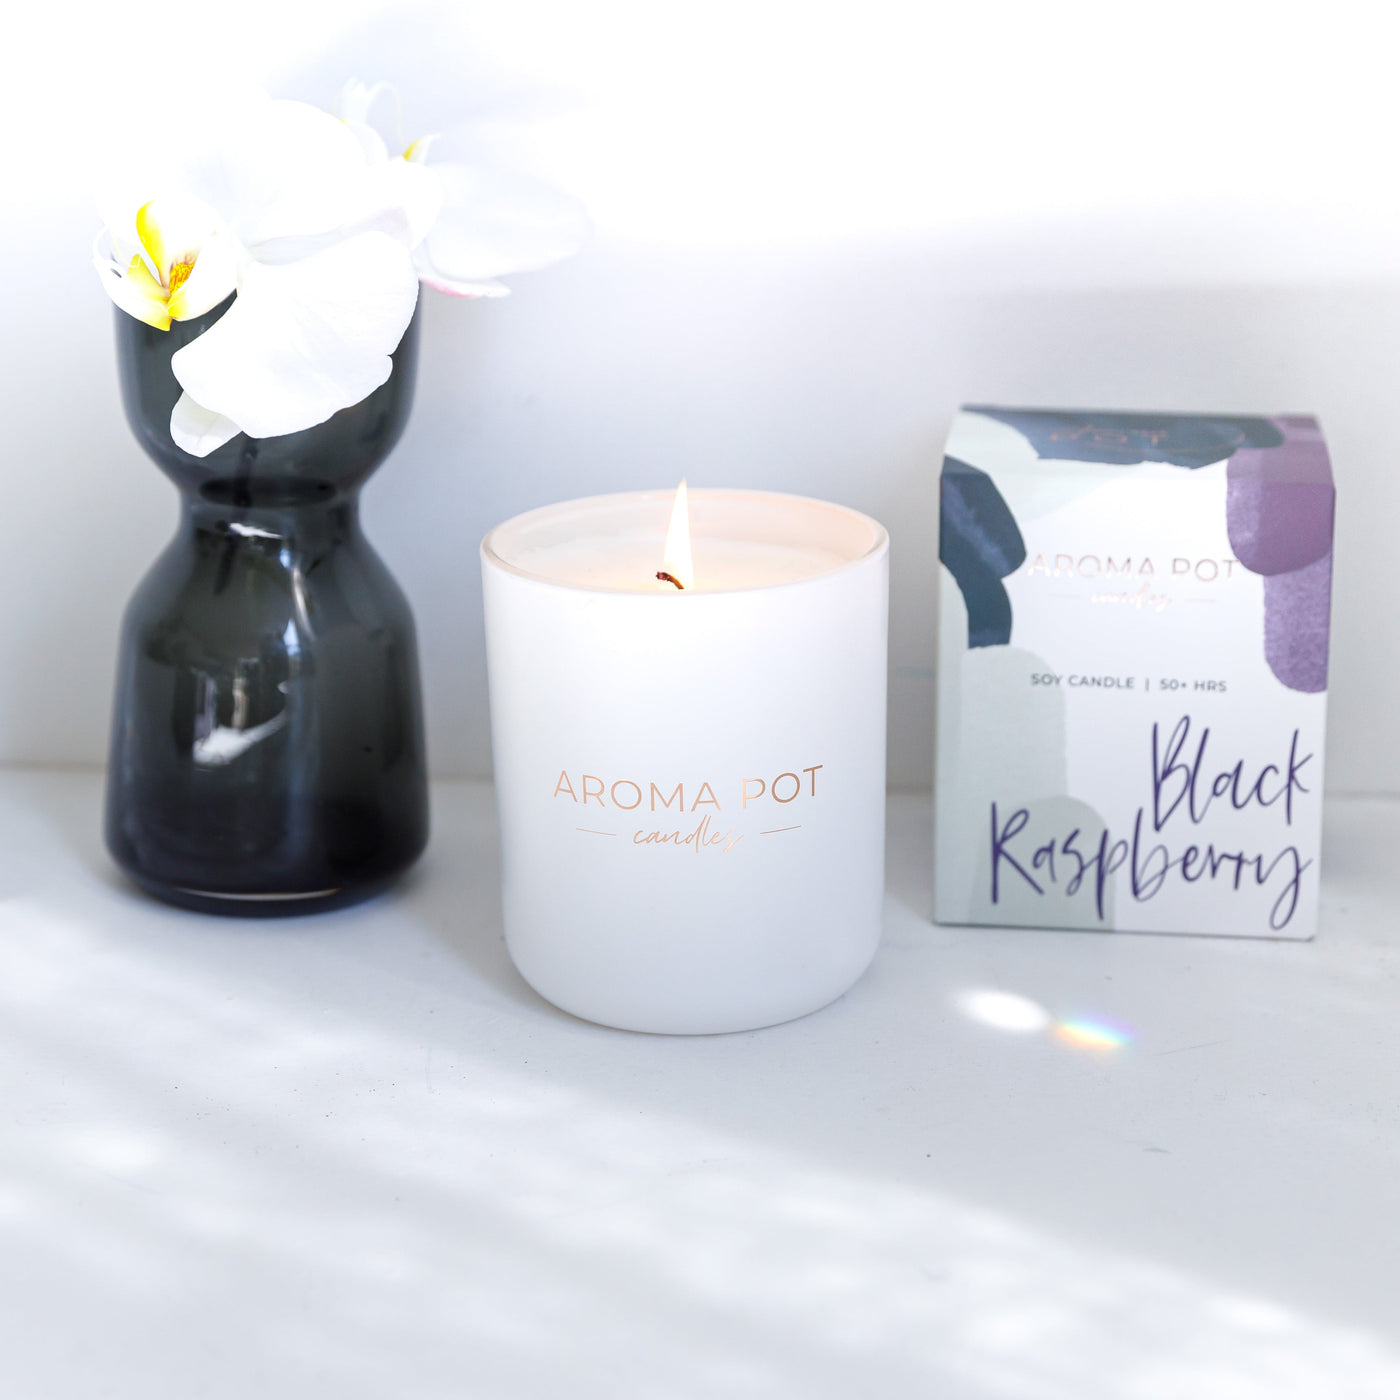 Classic bundle - 2 x classic candles of your choice